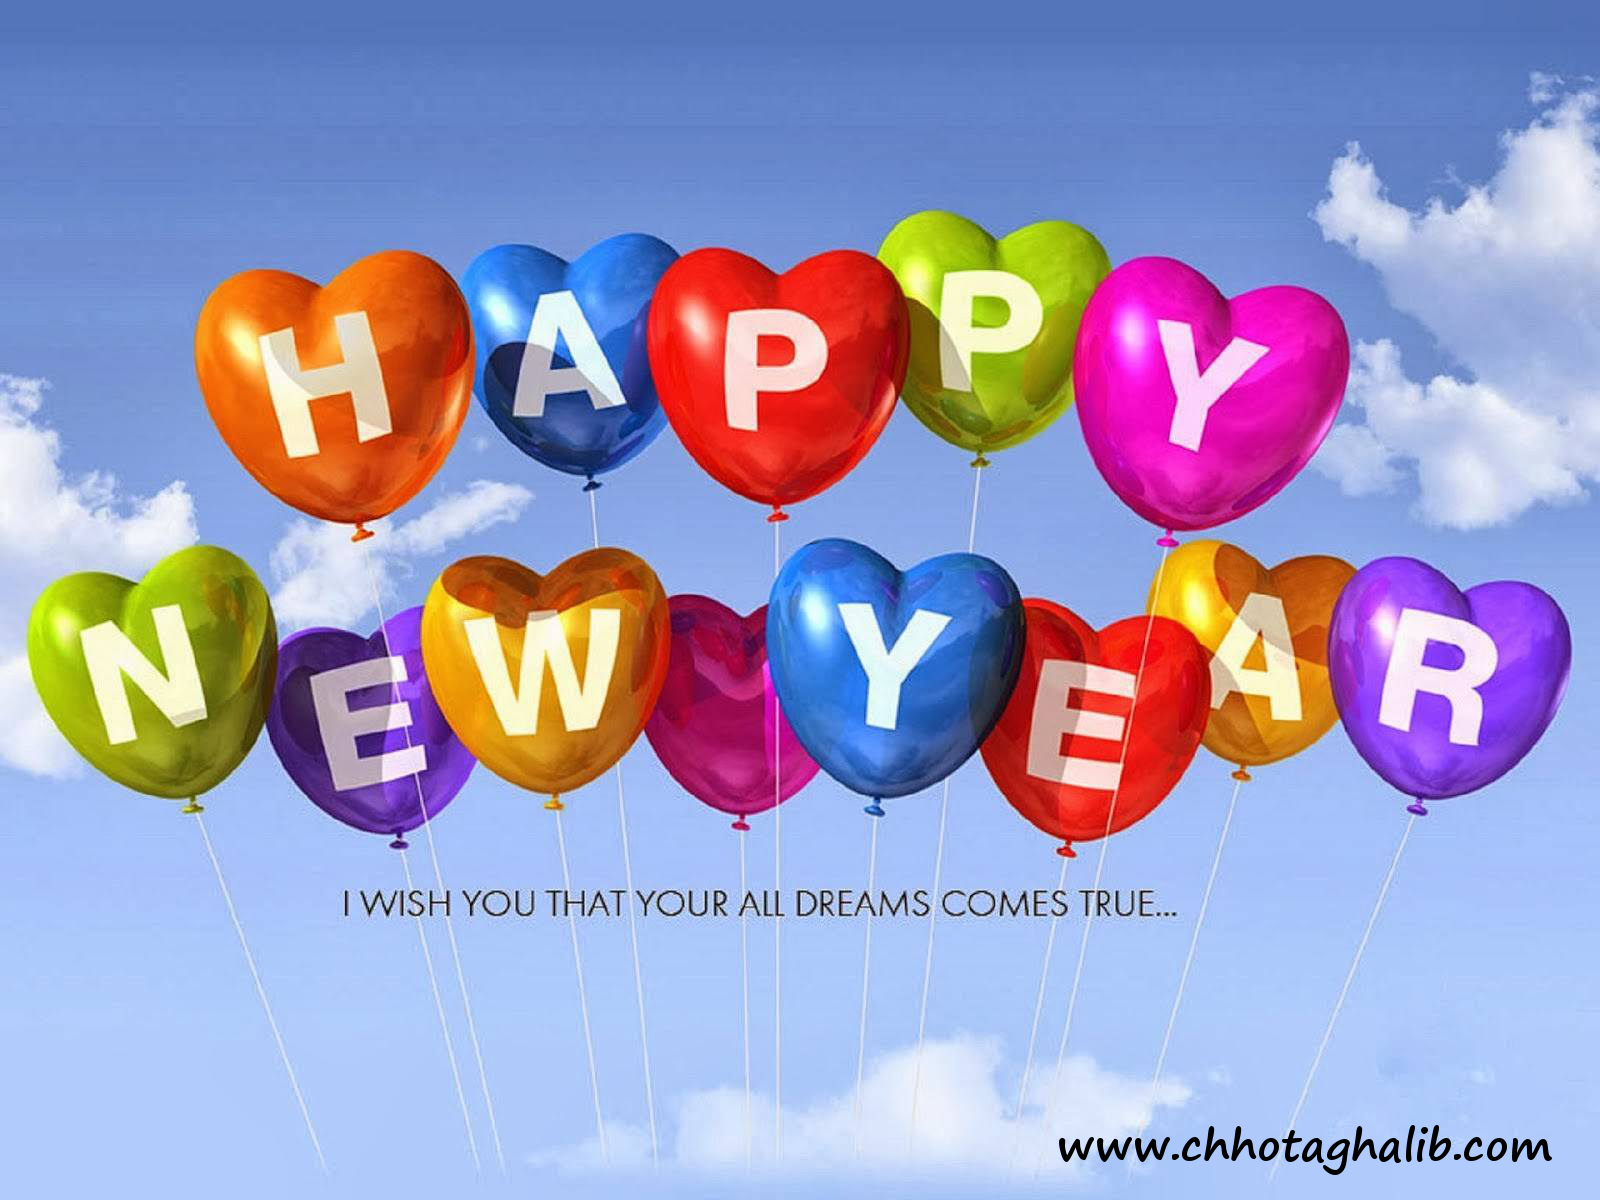 Beautiful-Happy-New-Year-2014-HD-Wallpapers-by-techblogstop-6